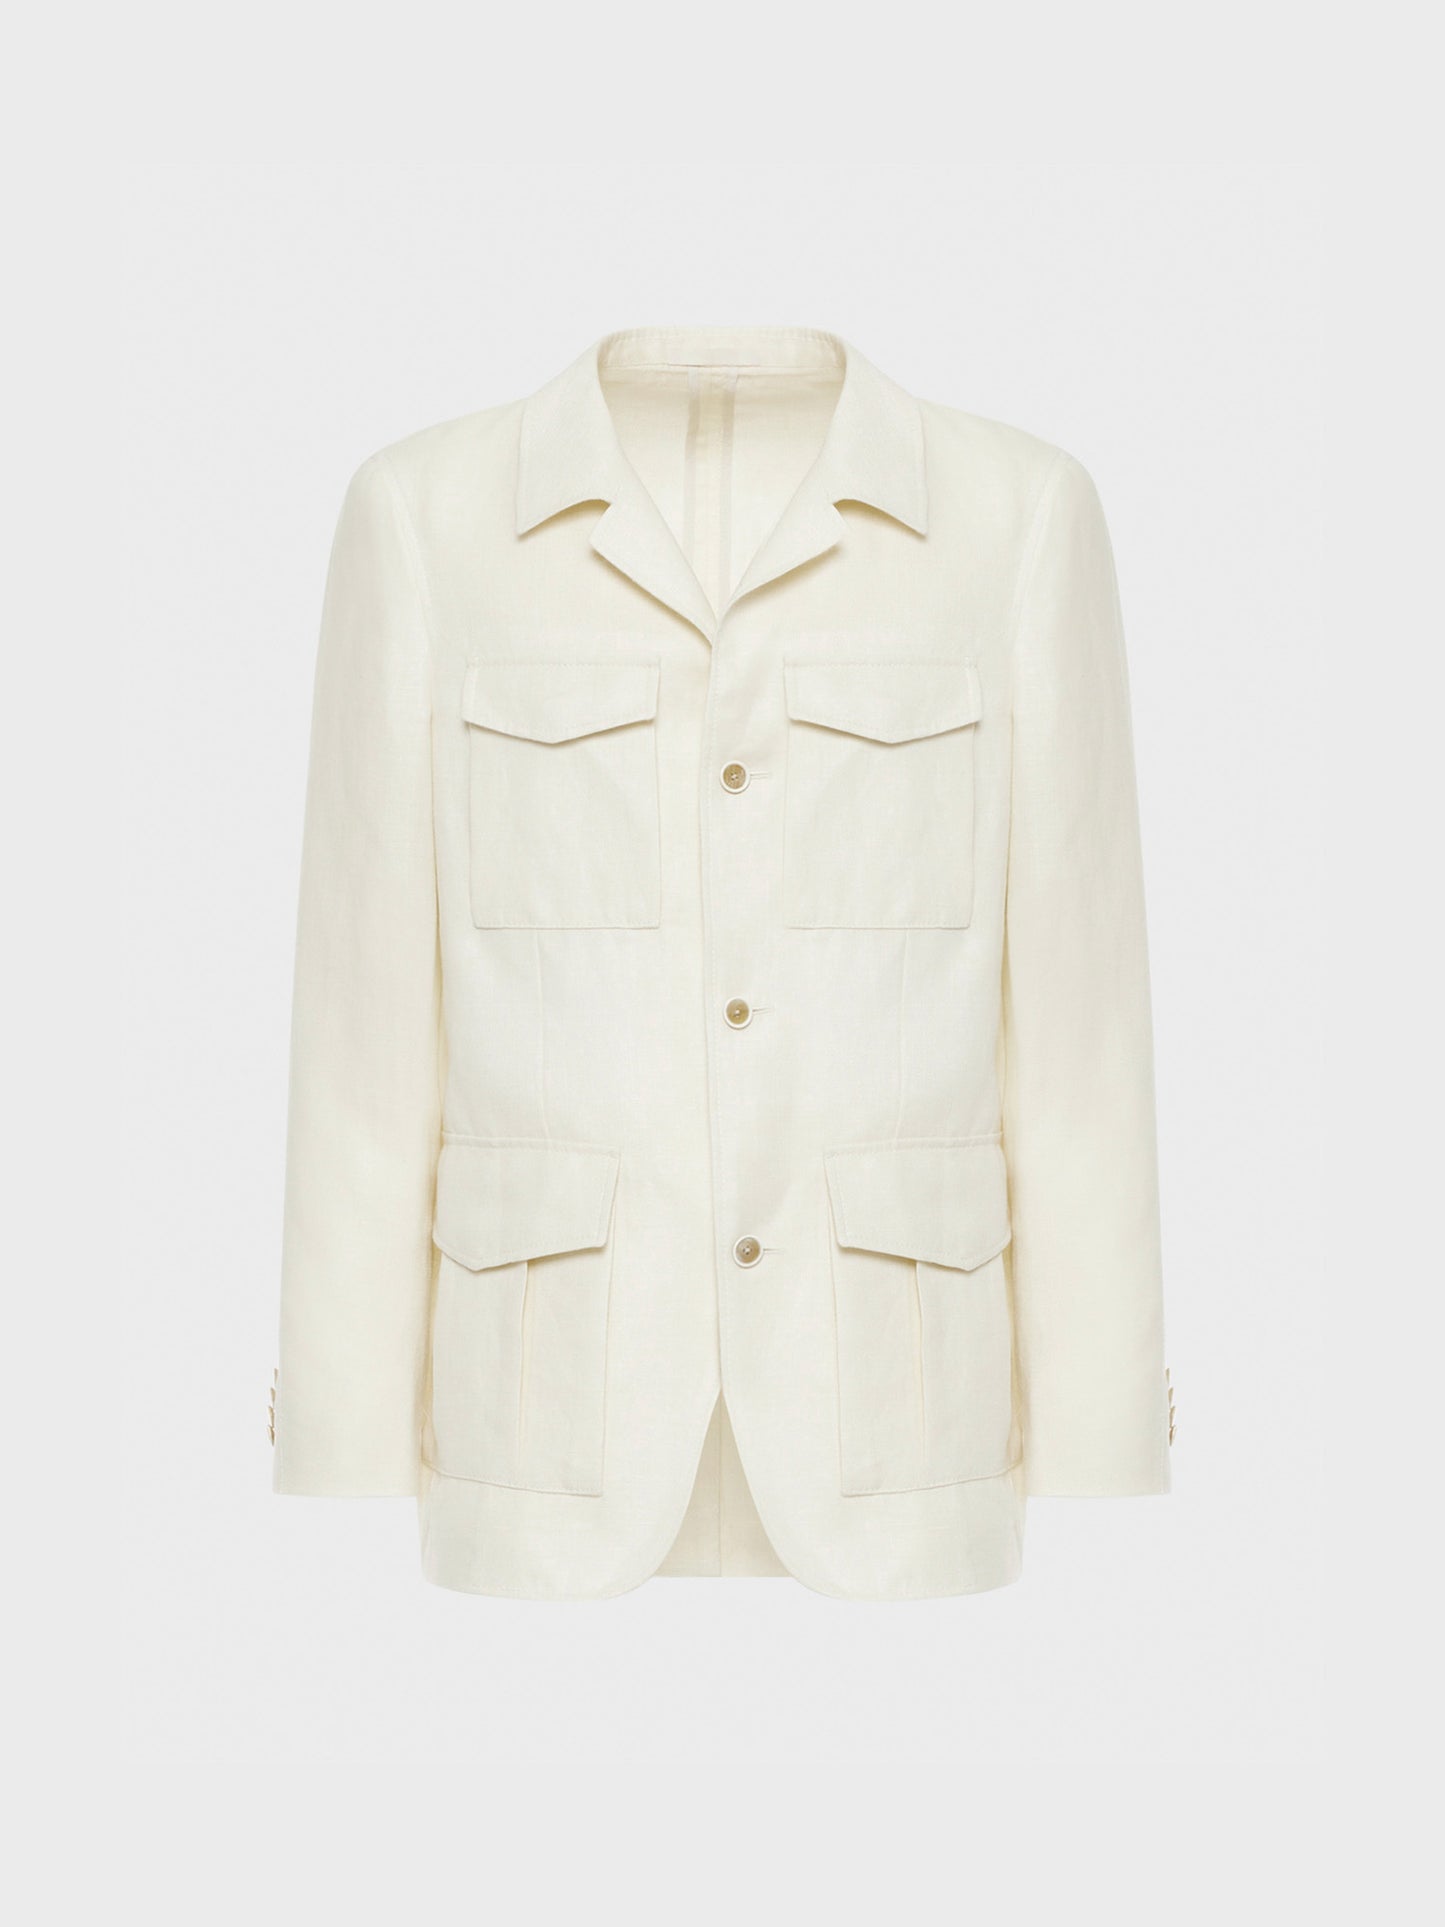 White linen and wool Safari jacket with four patch pockets